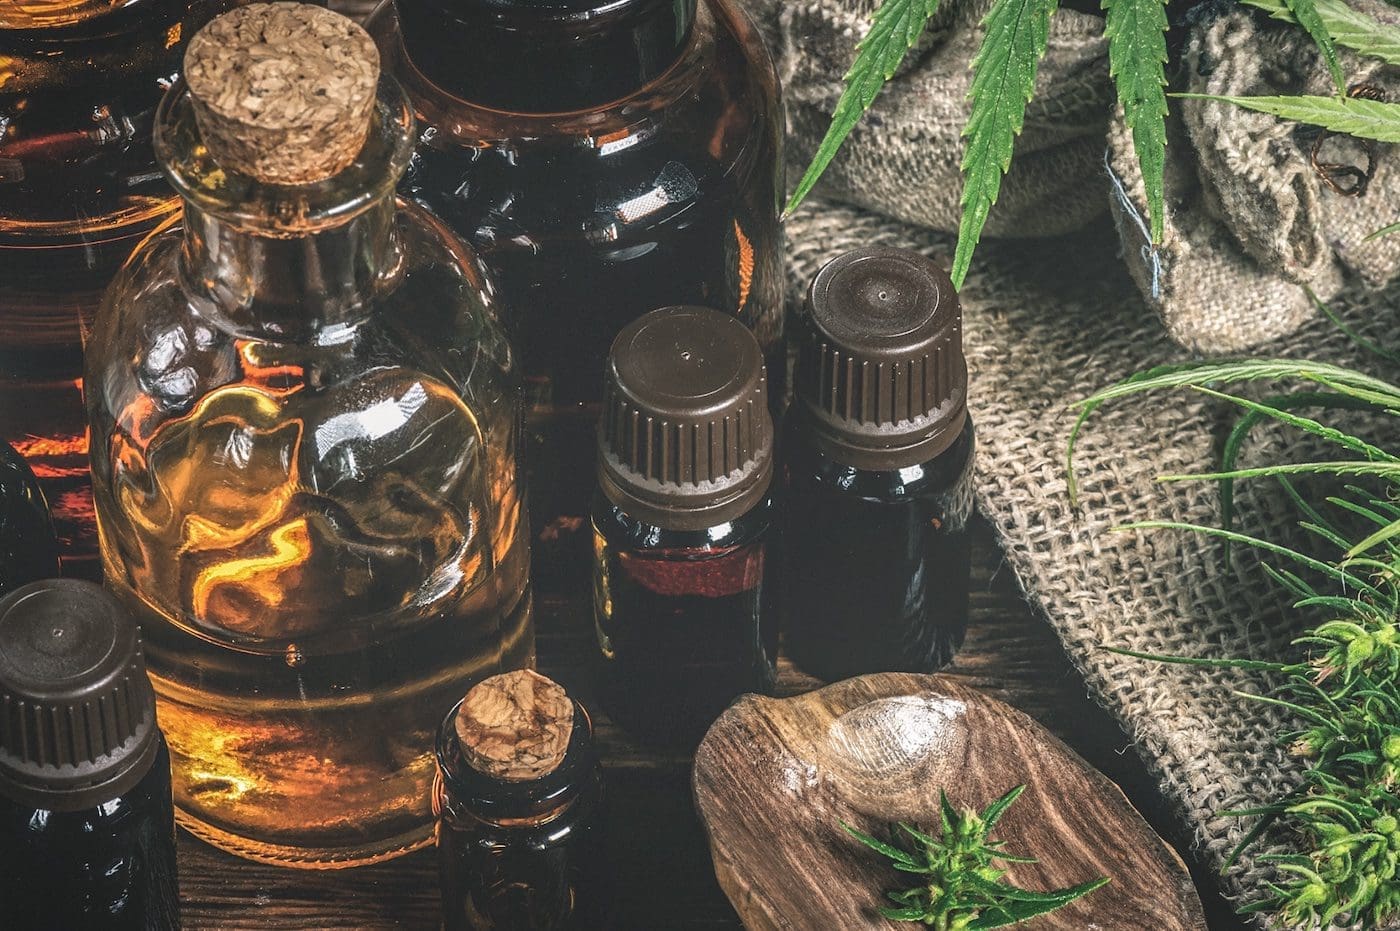 CBD is everywhere. Here's what you need to know to buy the best CBD products.